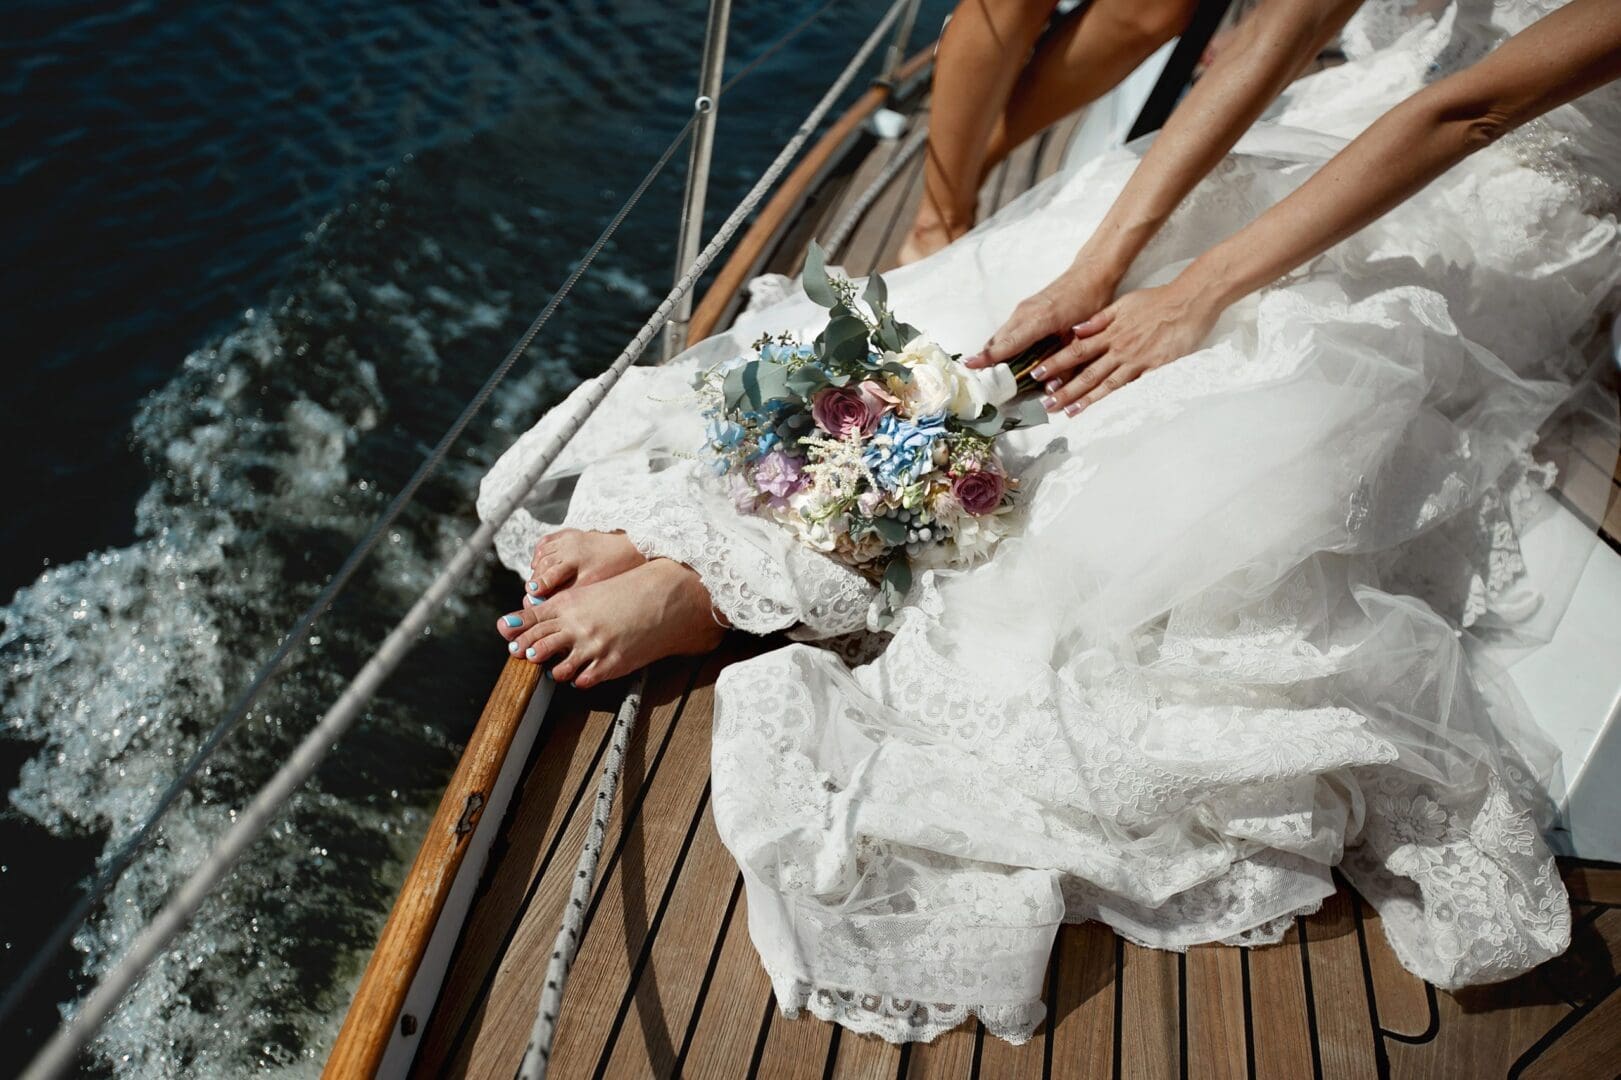 A bride and groom on the deck of their boat.